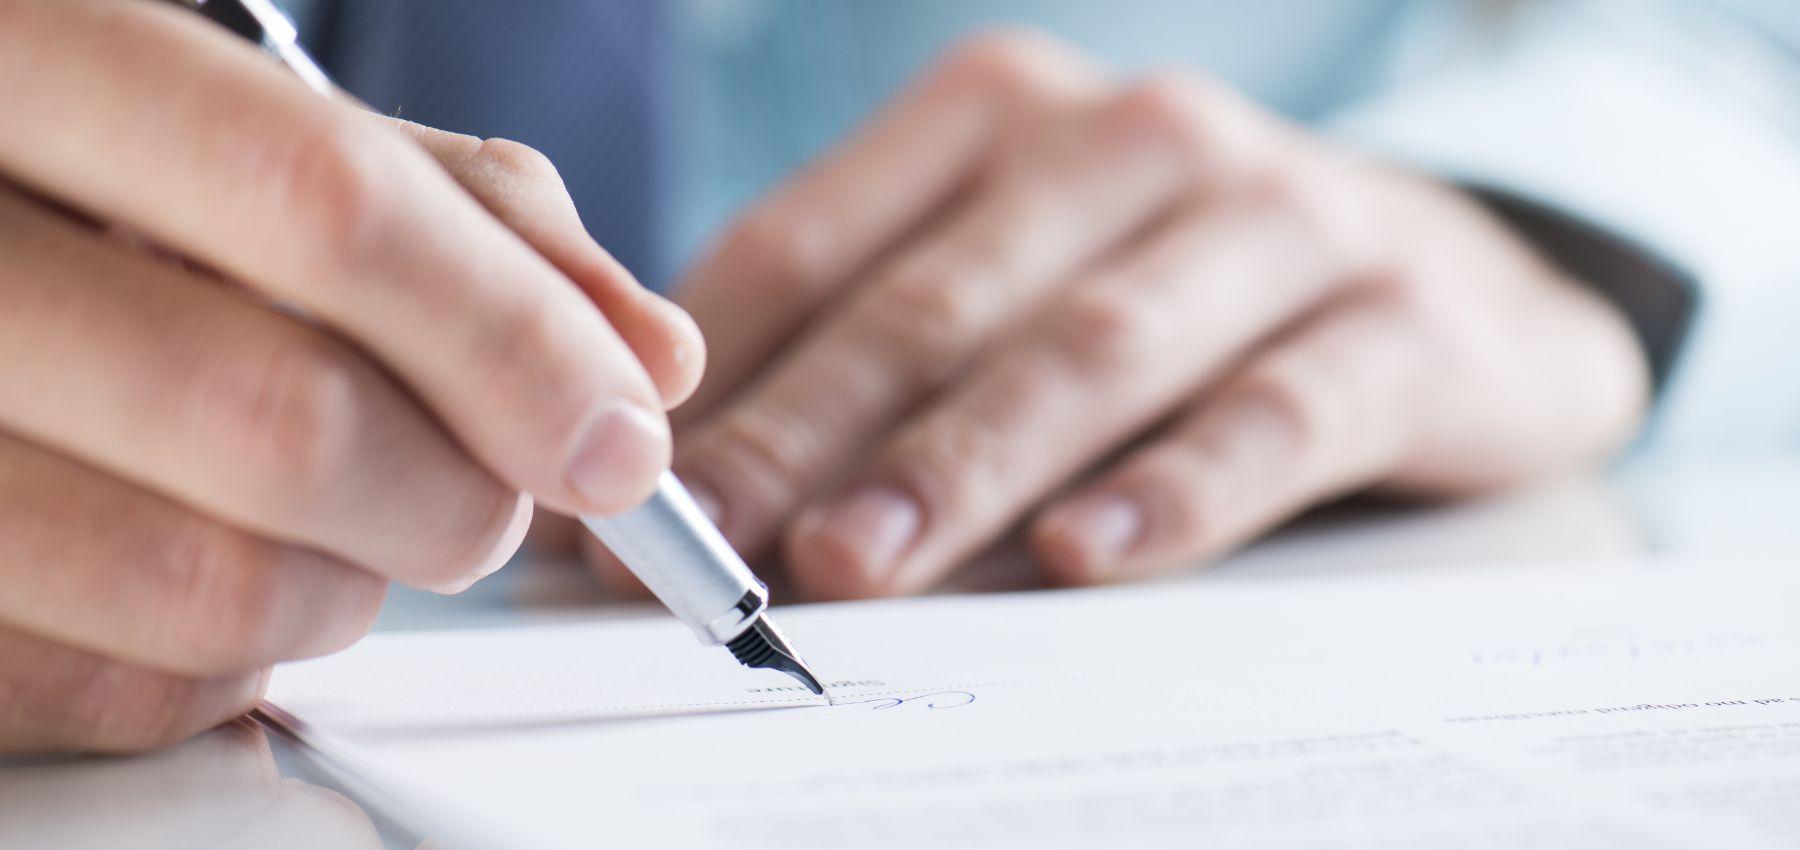 A hand holding a pen signs a document